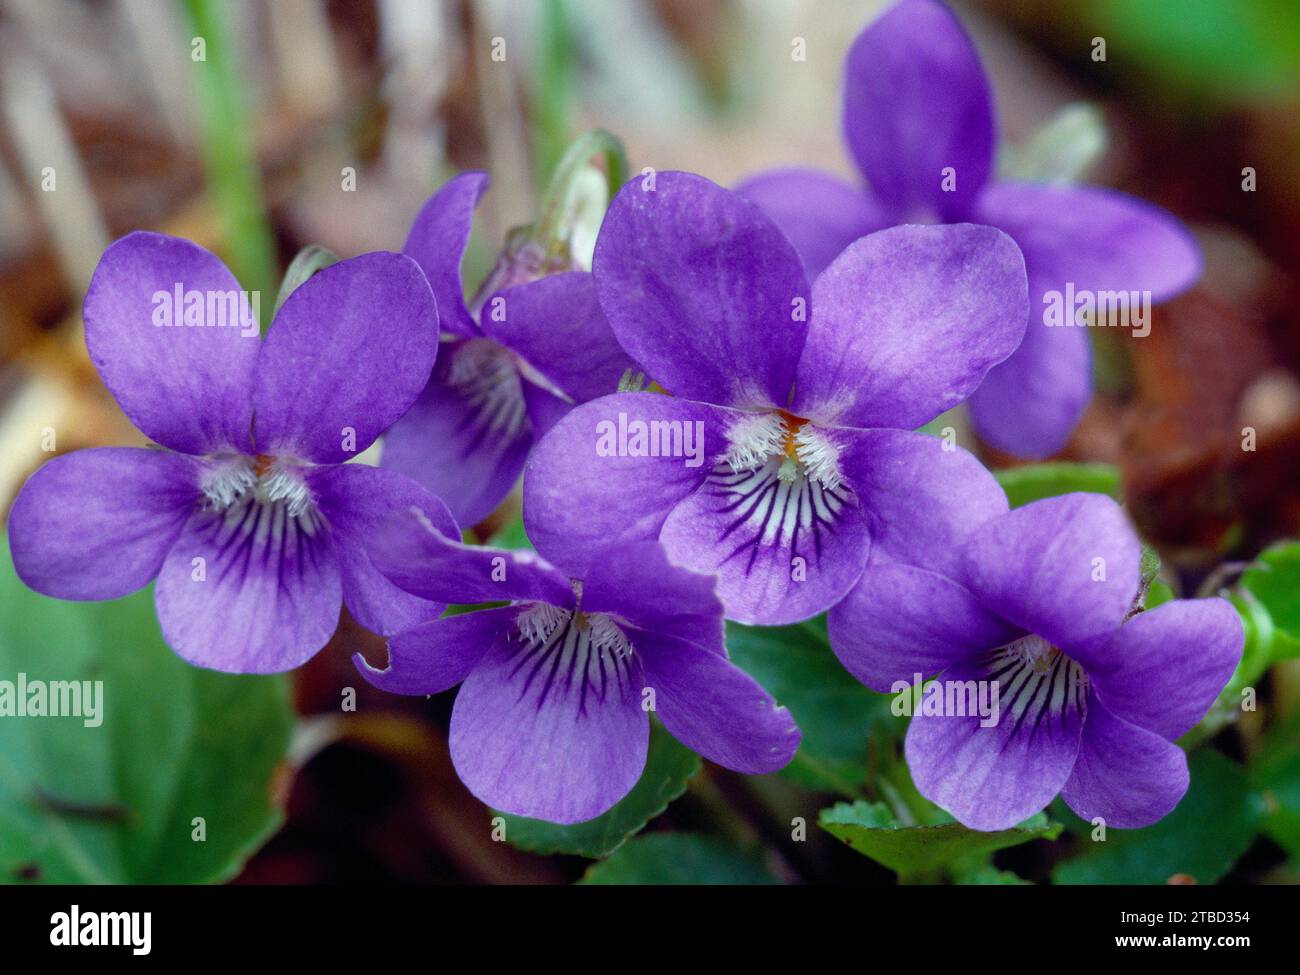 Common Dog Violet (Viola riviniana) close-up of closely-packed group of flowers growing in hazelwood, Isle of Mull, Argyll, Scotland, April 1989 Stock Photo